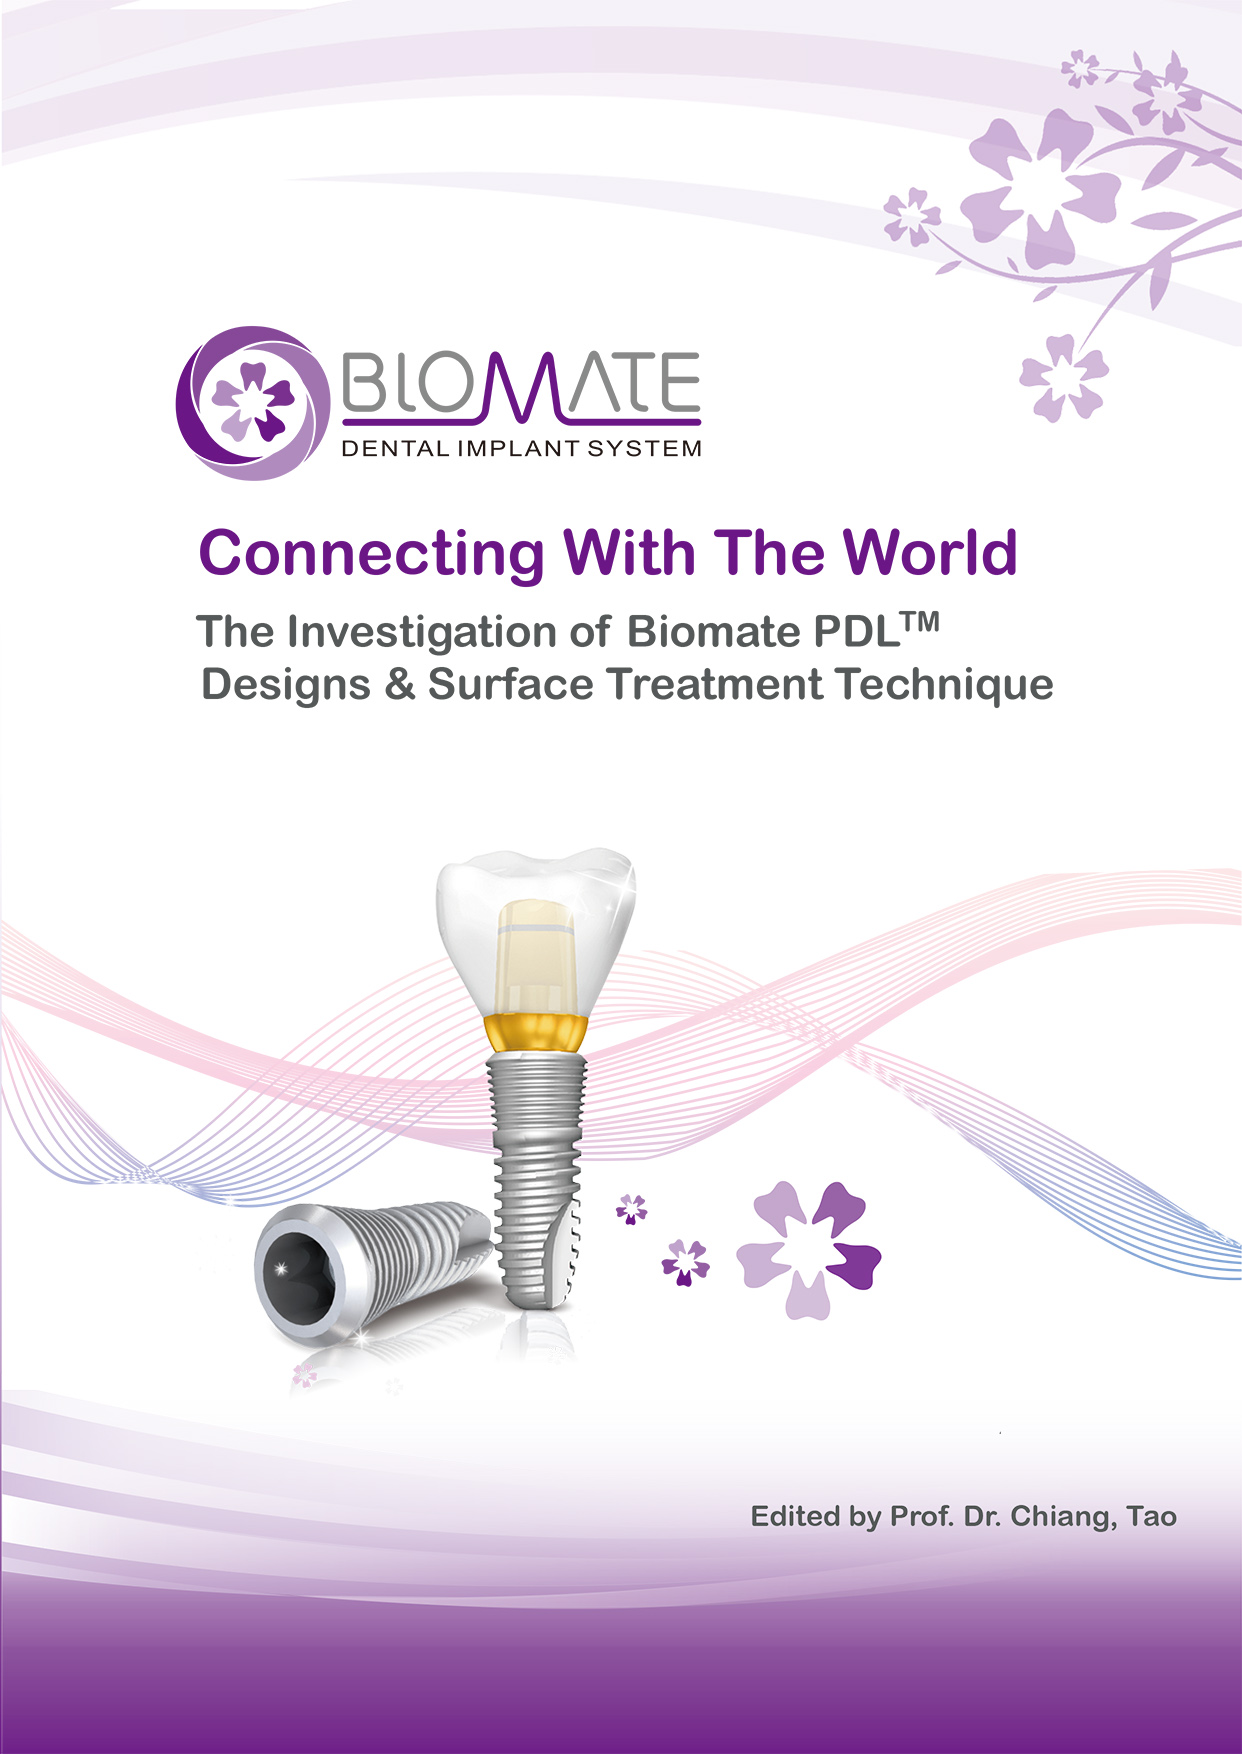 The Investigation of Biomate PDL®